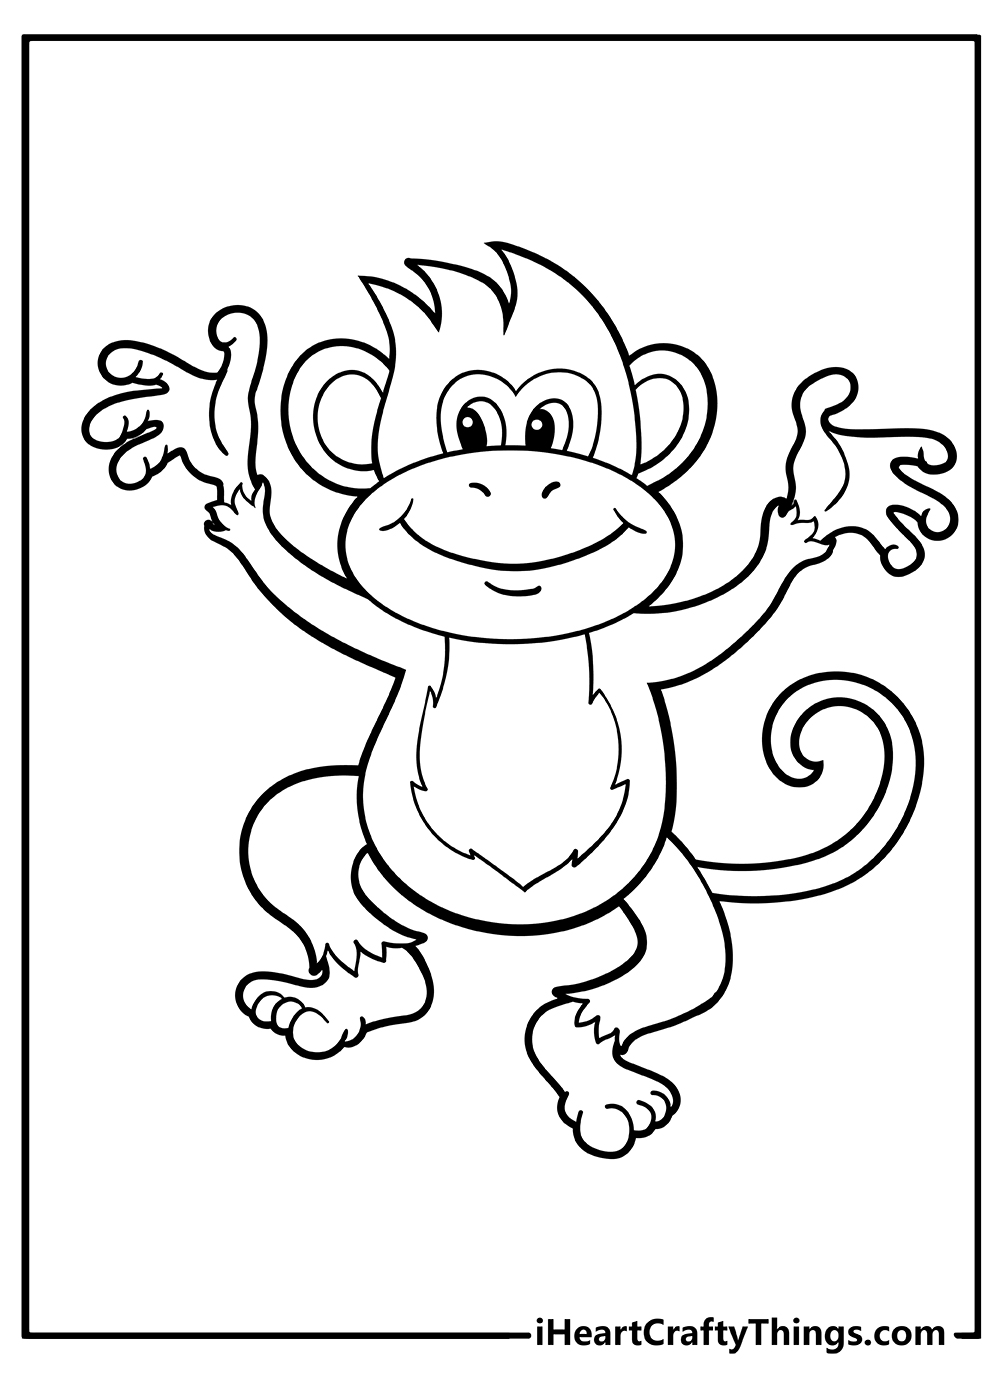 Monkey Coloring Pages for adults free printable